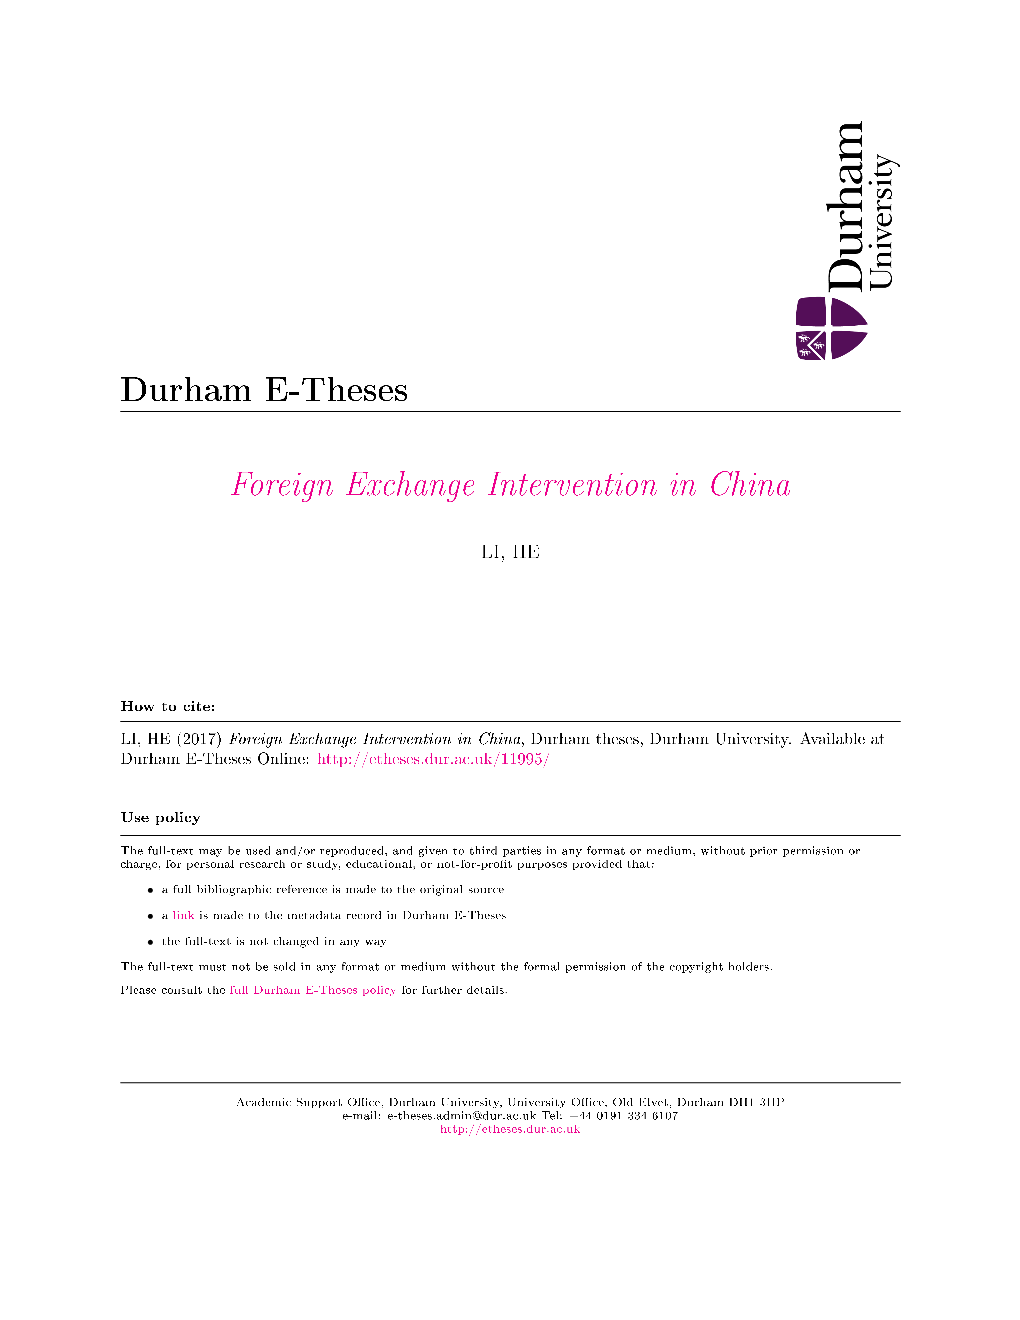 Foreign Exchange Intervention in China